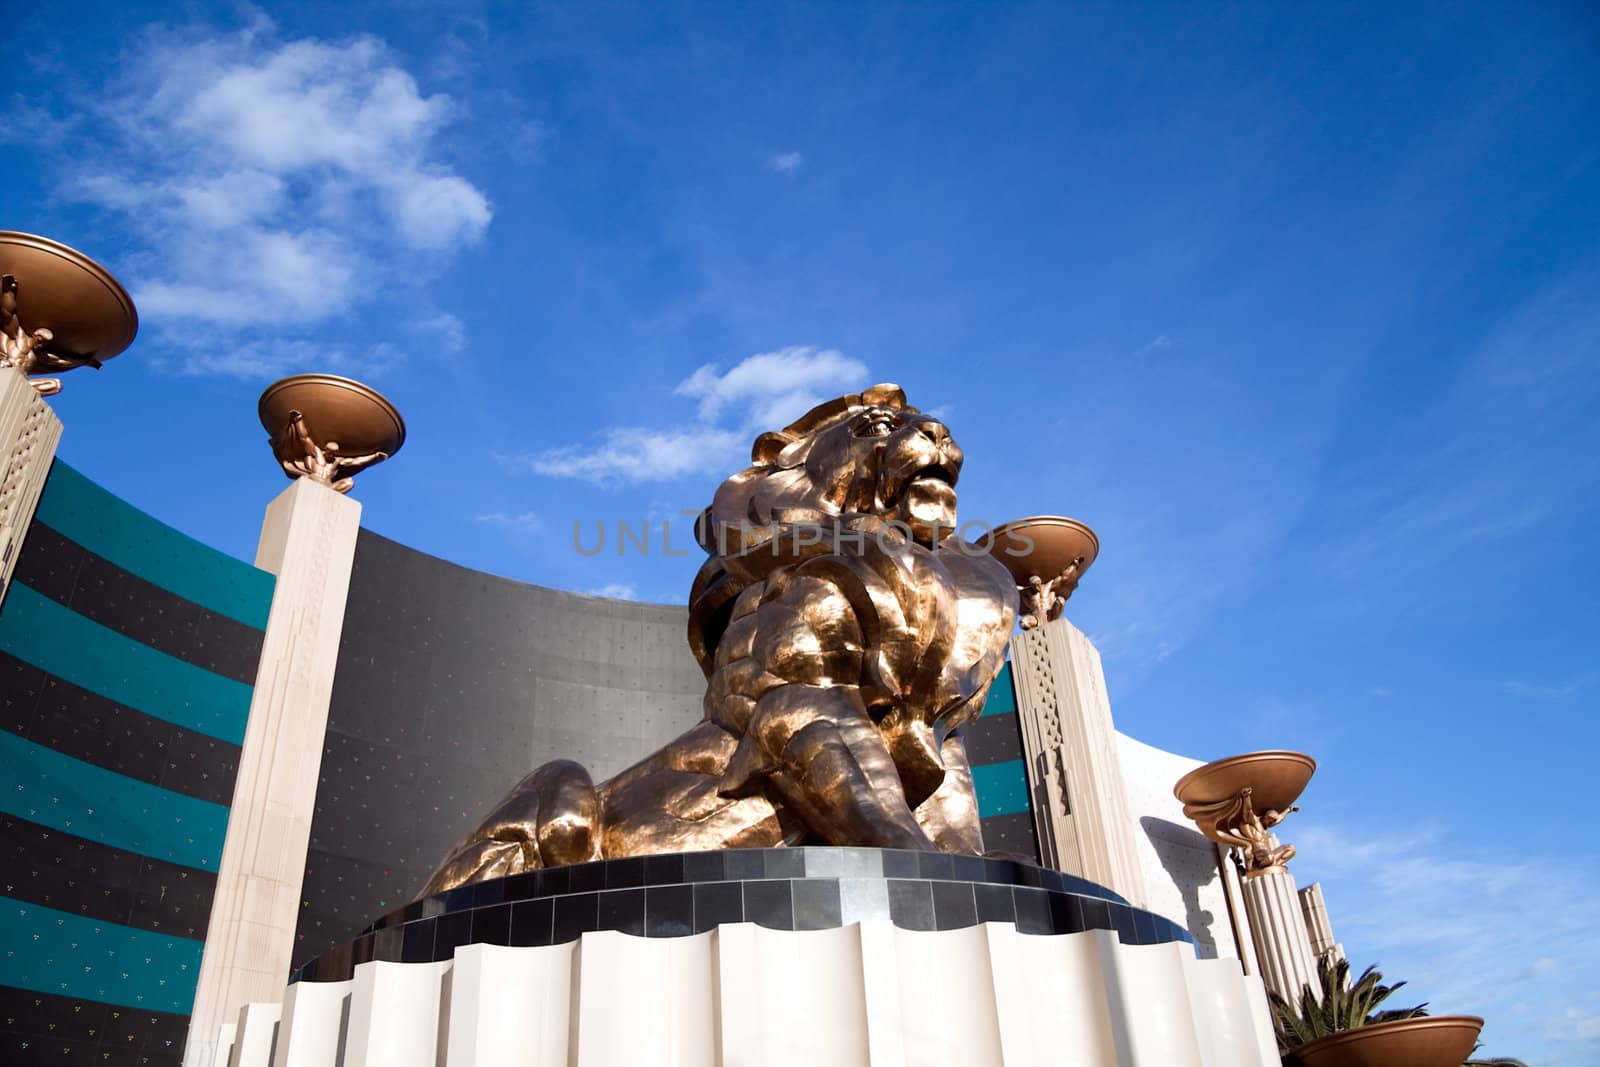 December 30th, 2009 - Las Vegas, Nevada, USA - The MGM Hotel and Casino lion, which is to bring good luck and is the entrance to the hotel. 